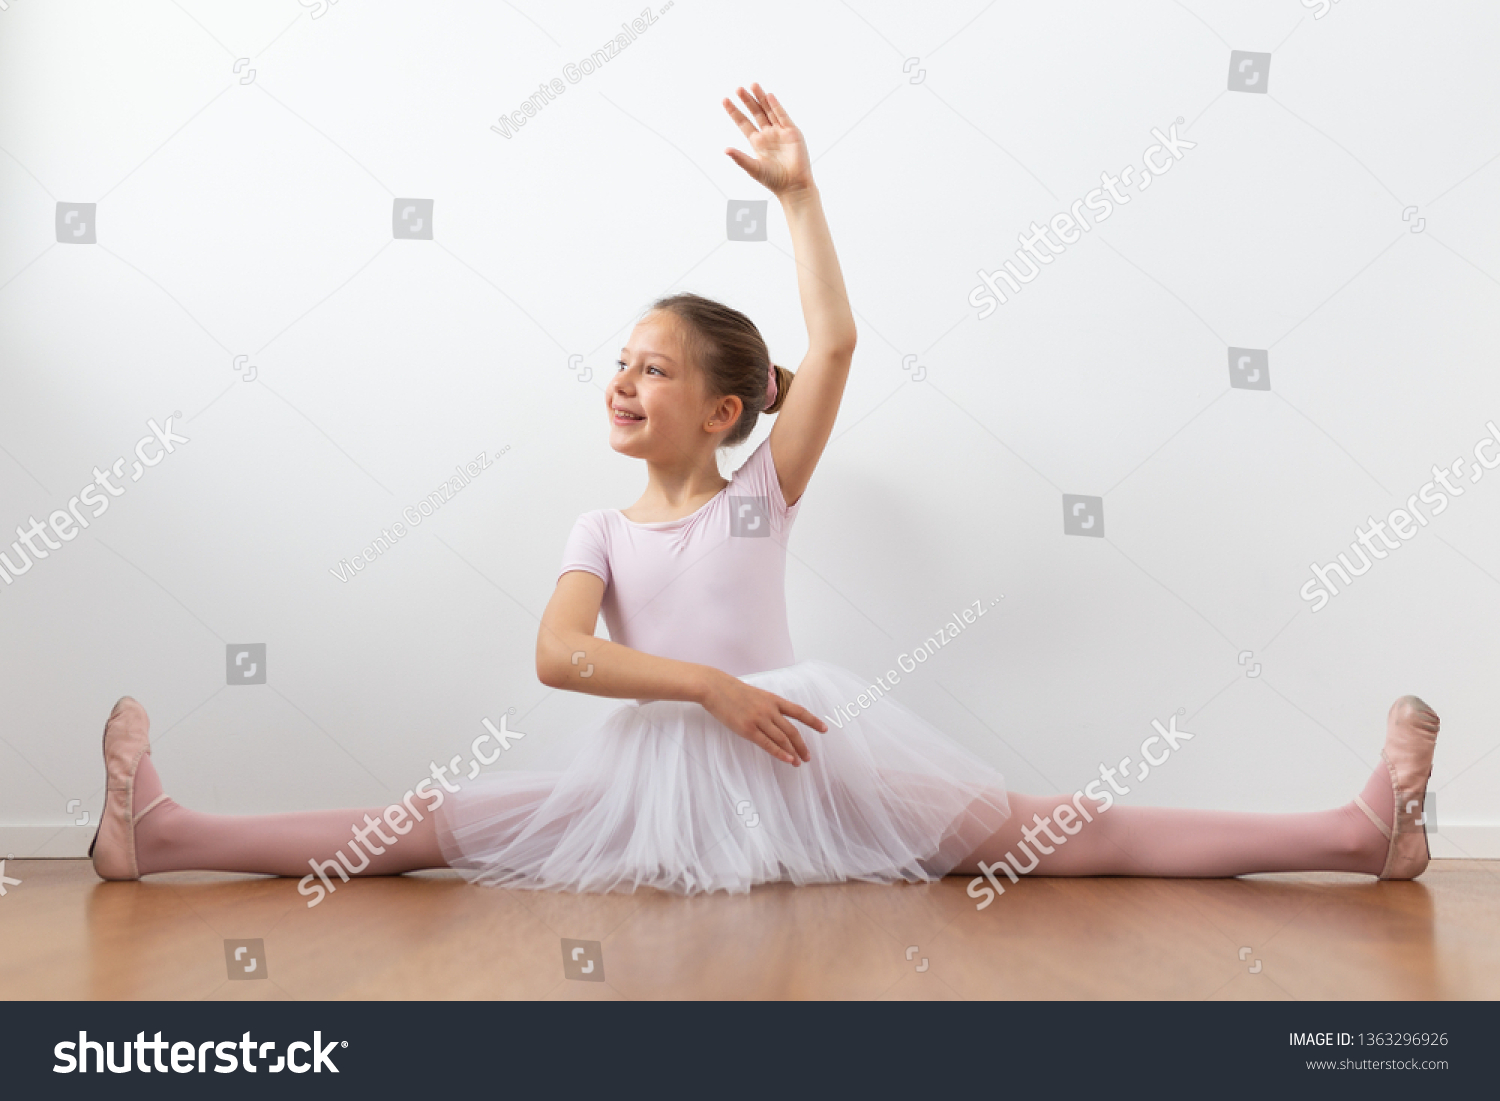 toddler girl open legs Little girl in cap sits on floor with legs spread apart and ...